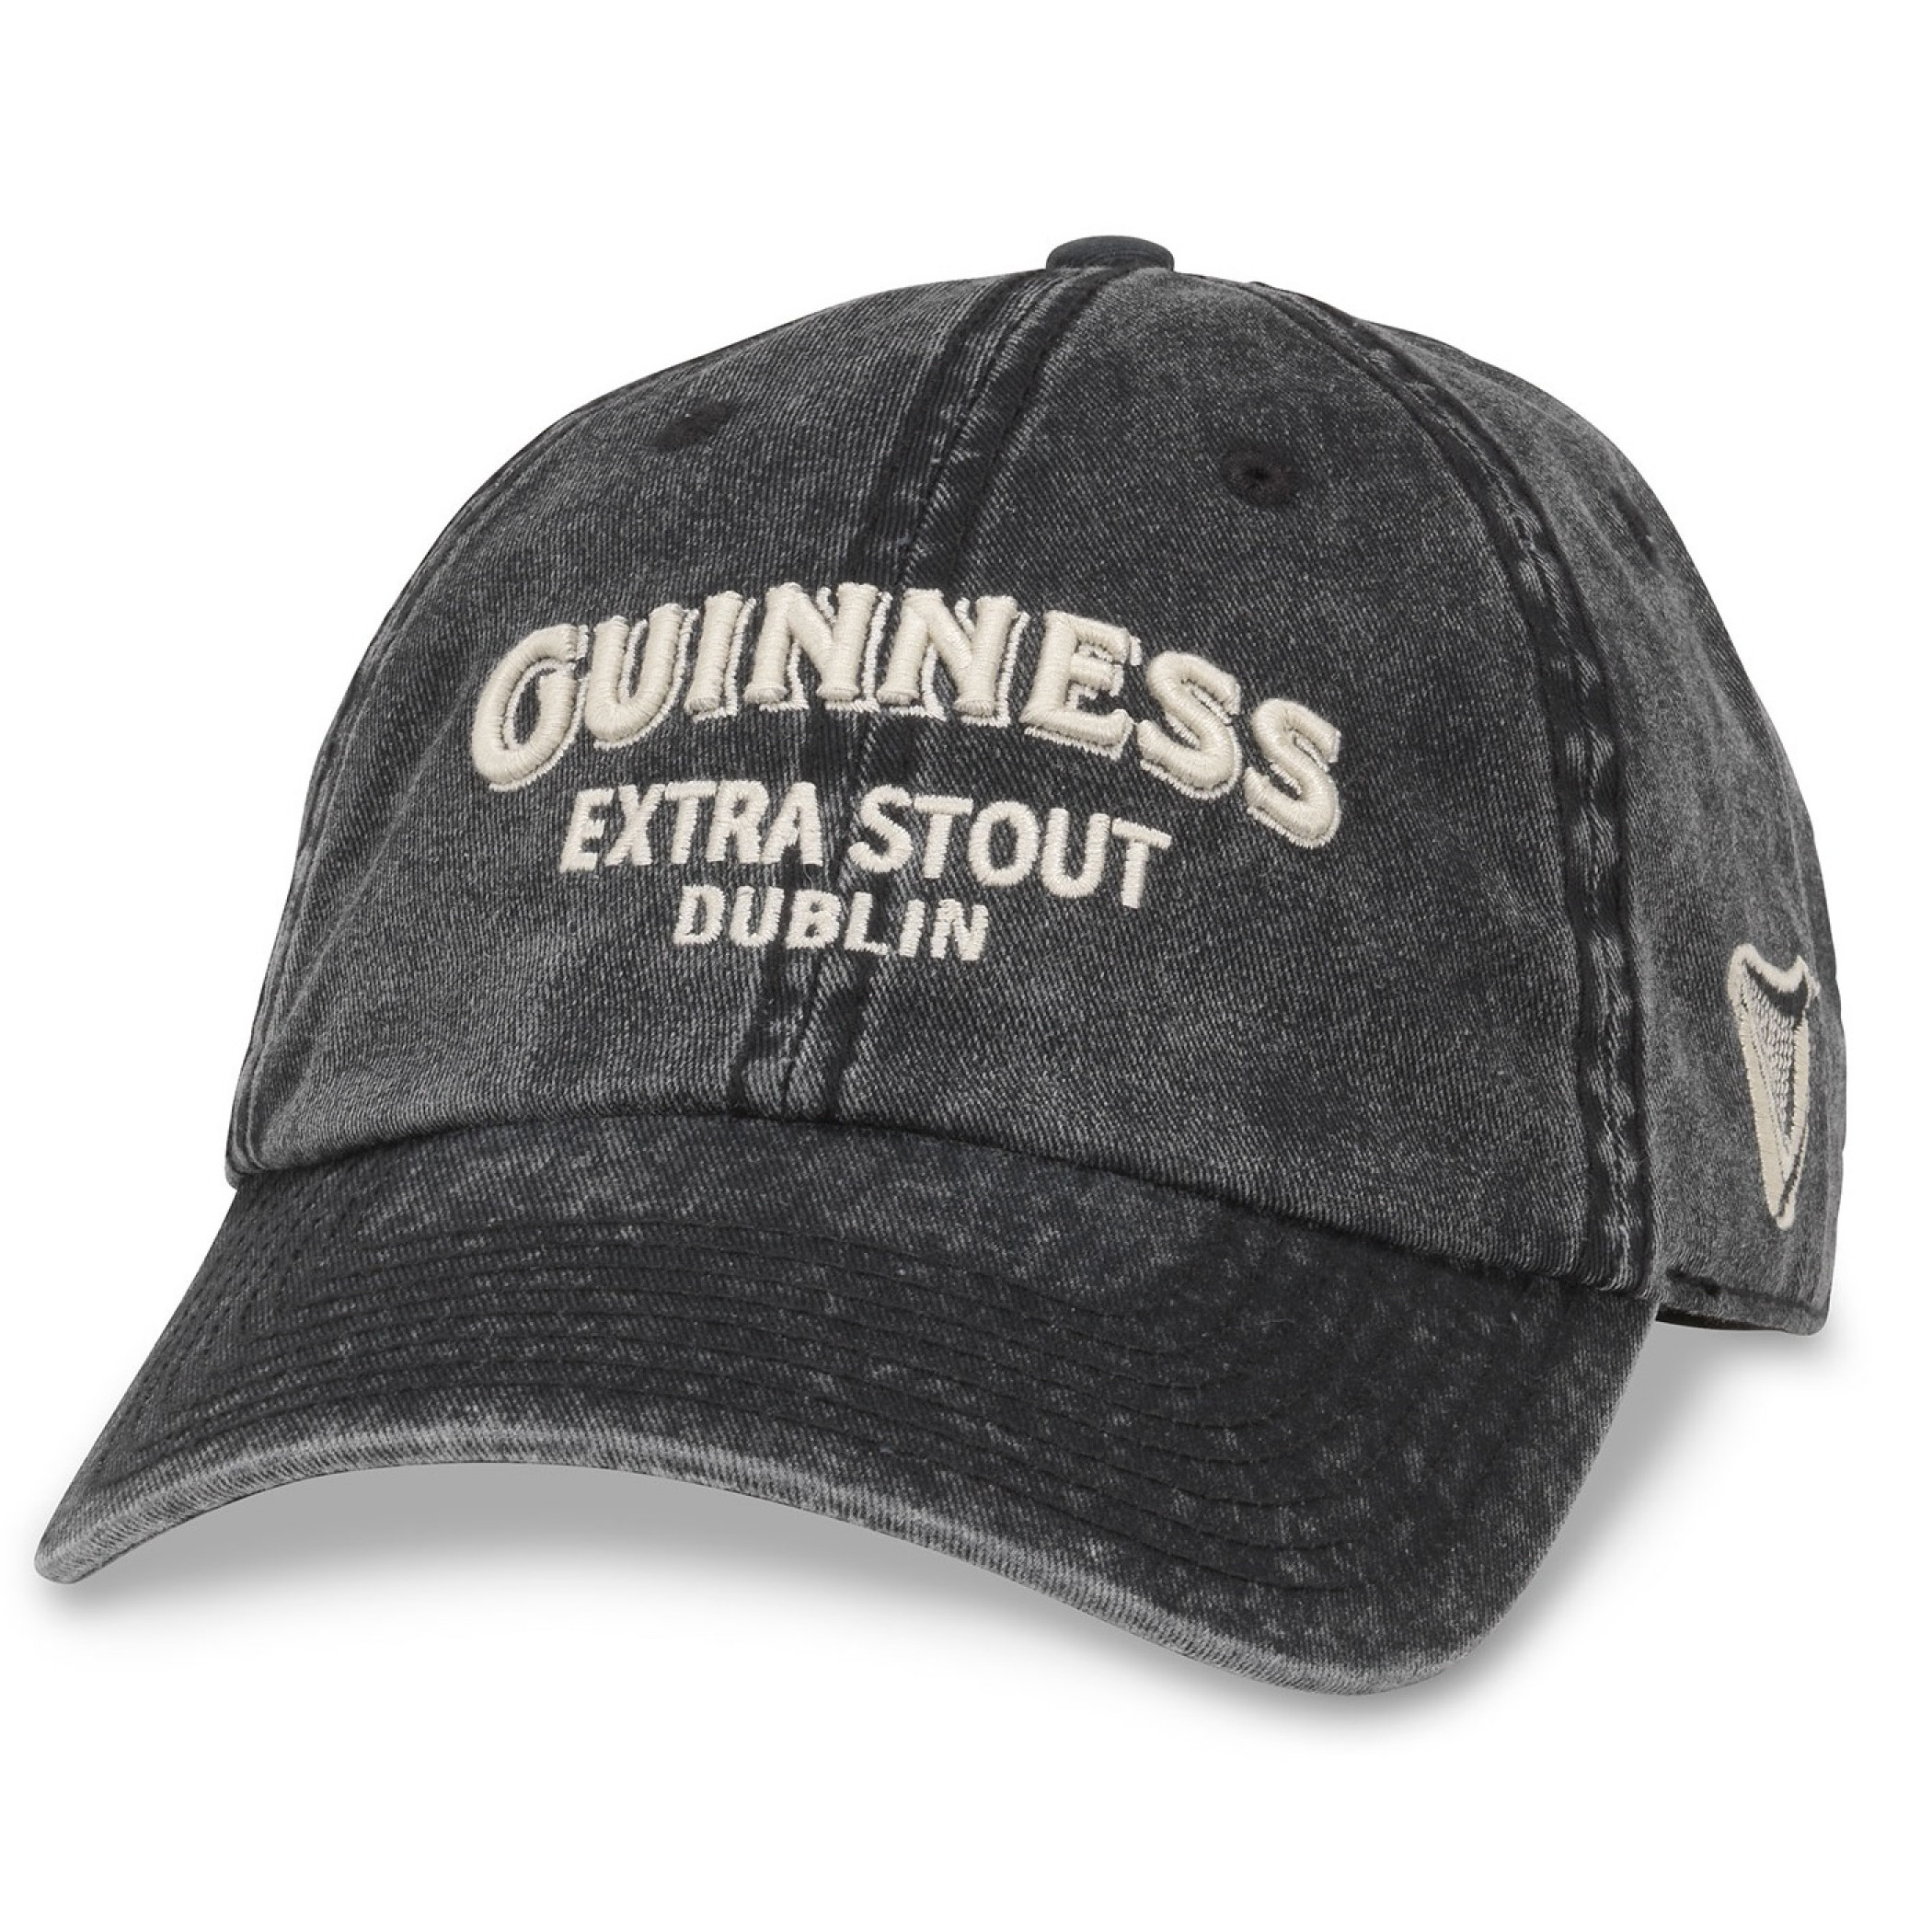 Guinness Extra Stout Faded Adjustable Black Hat